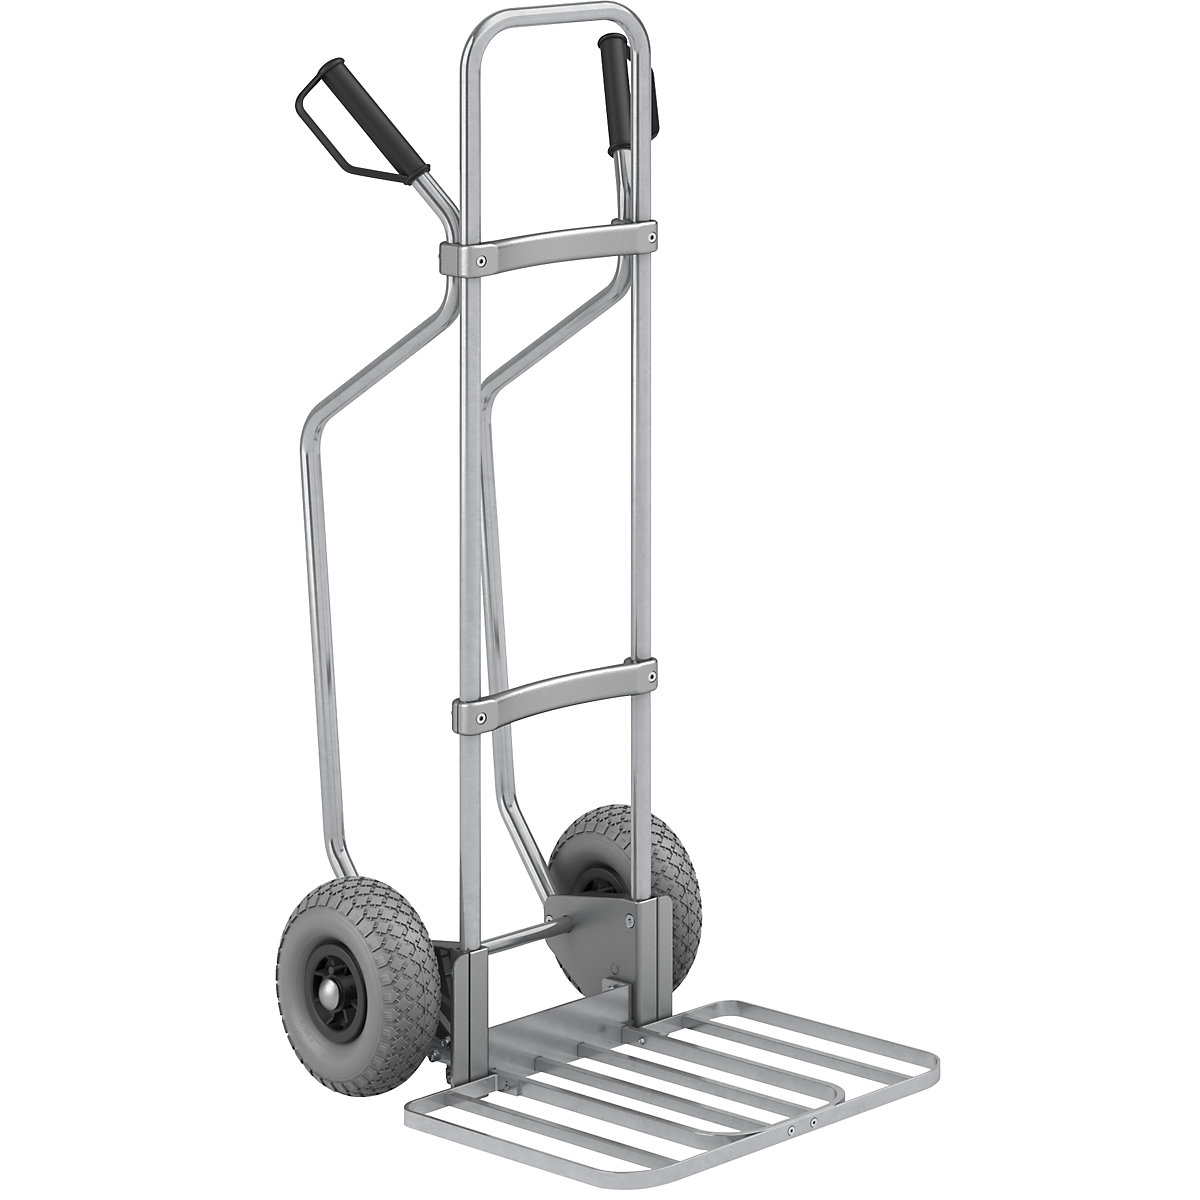 Sack truck with runners, zinc plated – eurokraft pro, parcel footplate WxD 430 x 450 mm, zinc plated, PU tyres-3